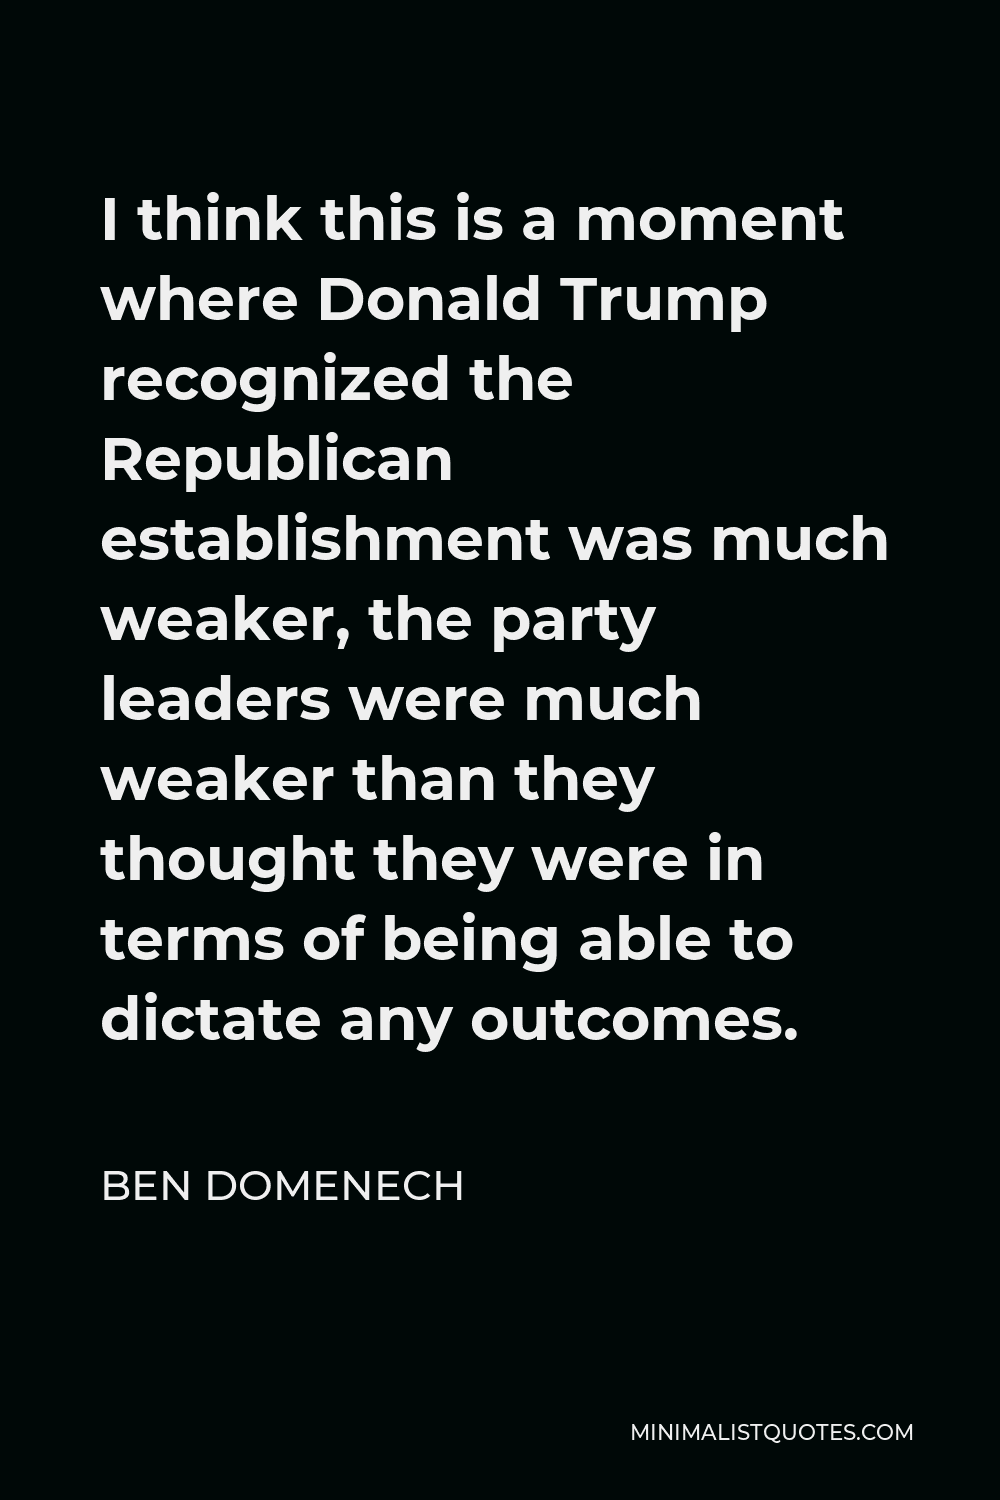 Ben Domenech Quote - I think this is a moment where Donald Trump recognized the Republican establishment was much weaker, the party leaders were much weaker than they thought they were in terms of being able to dictate any outcomes.